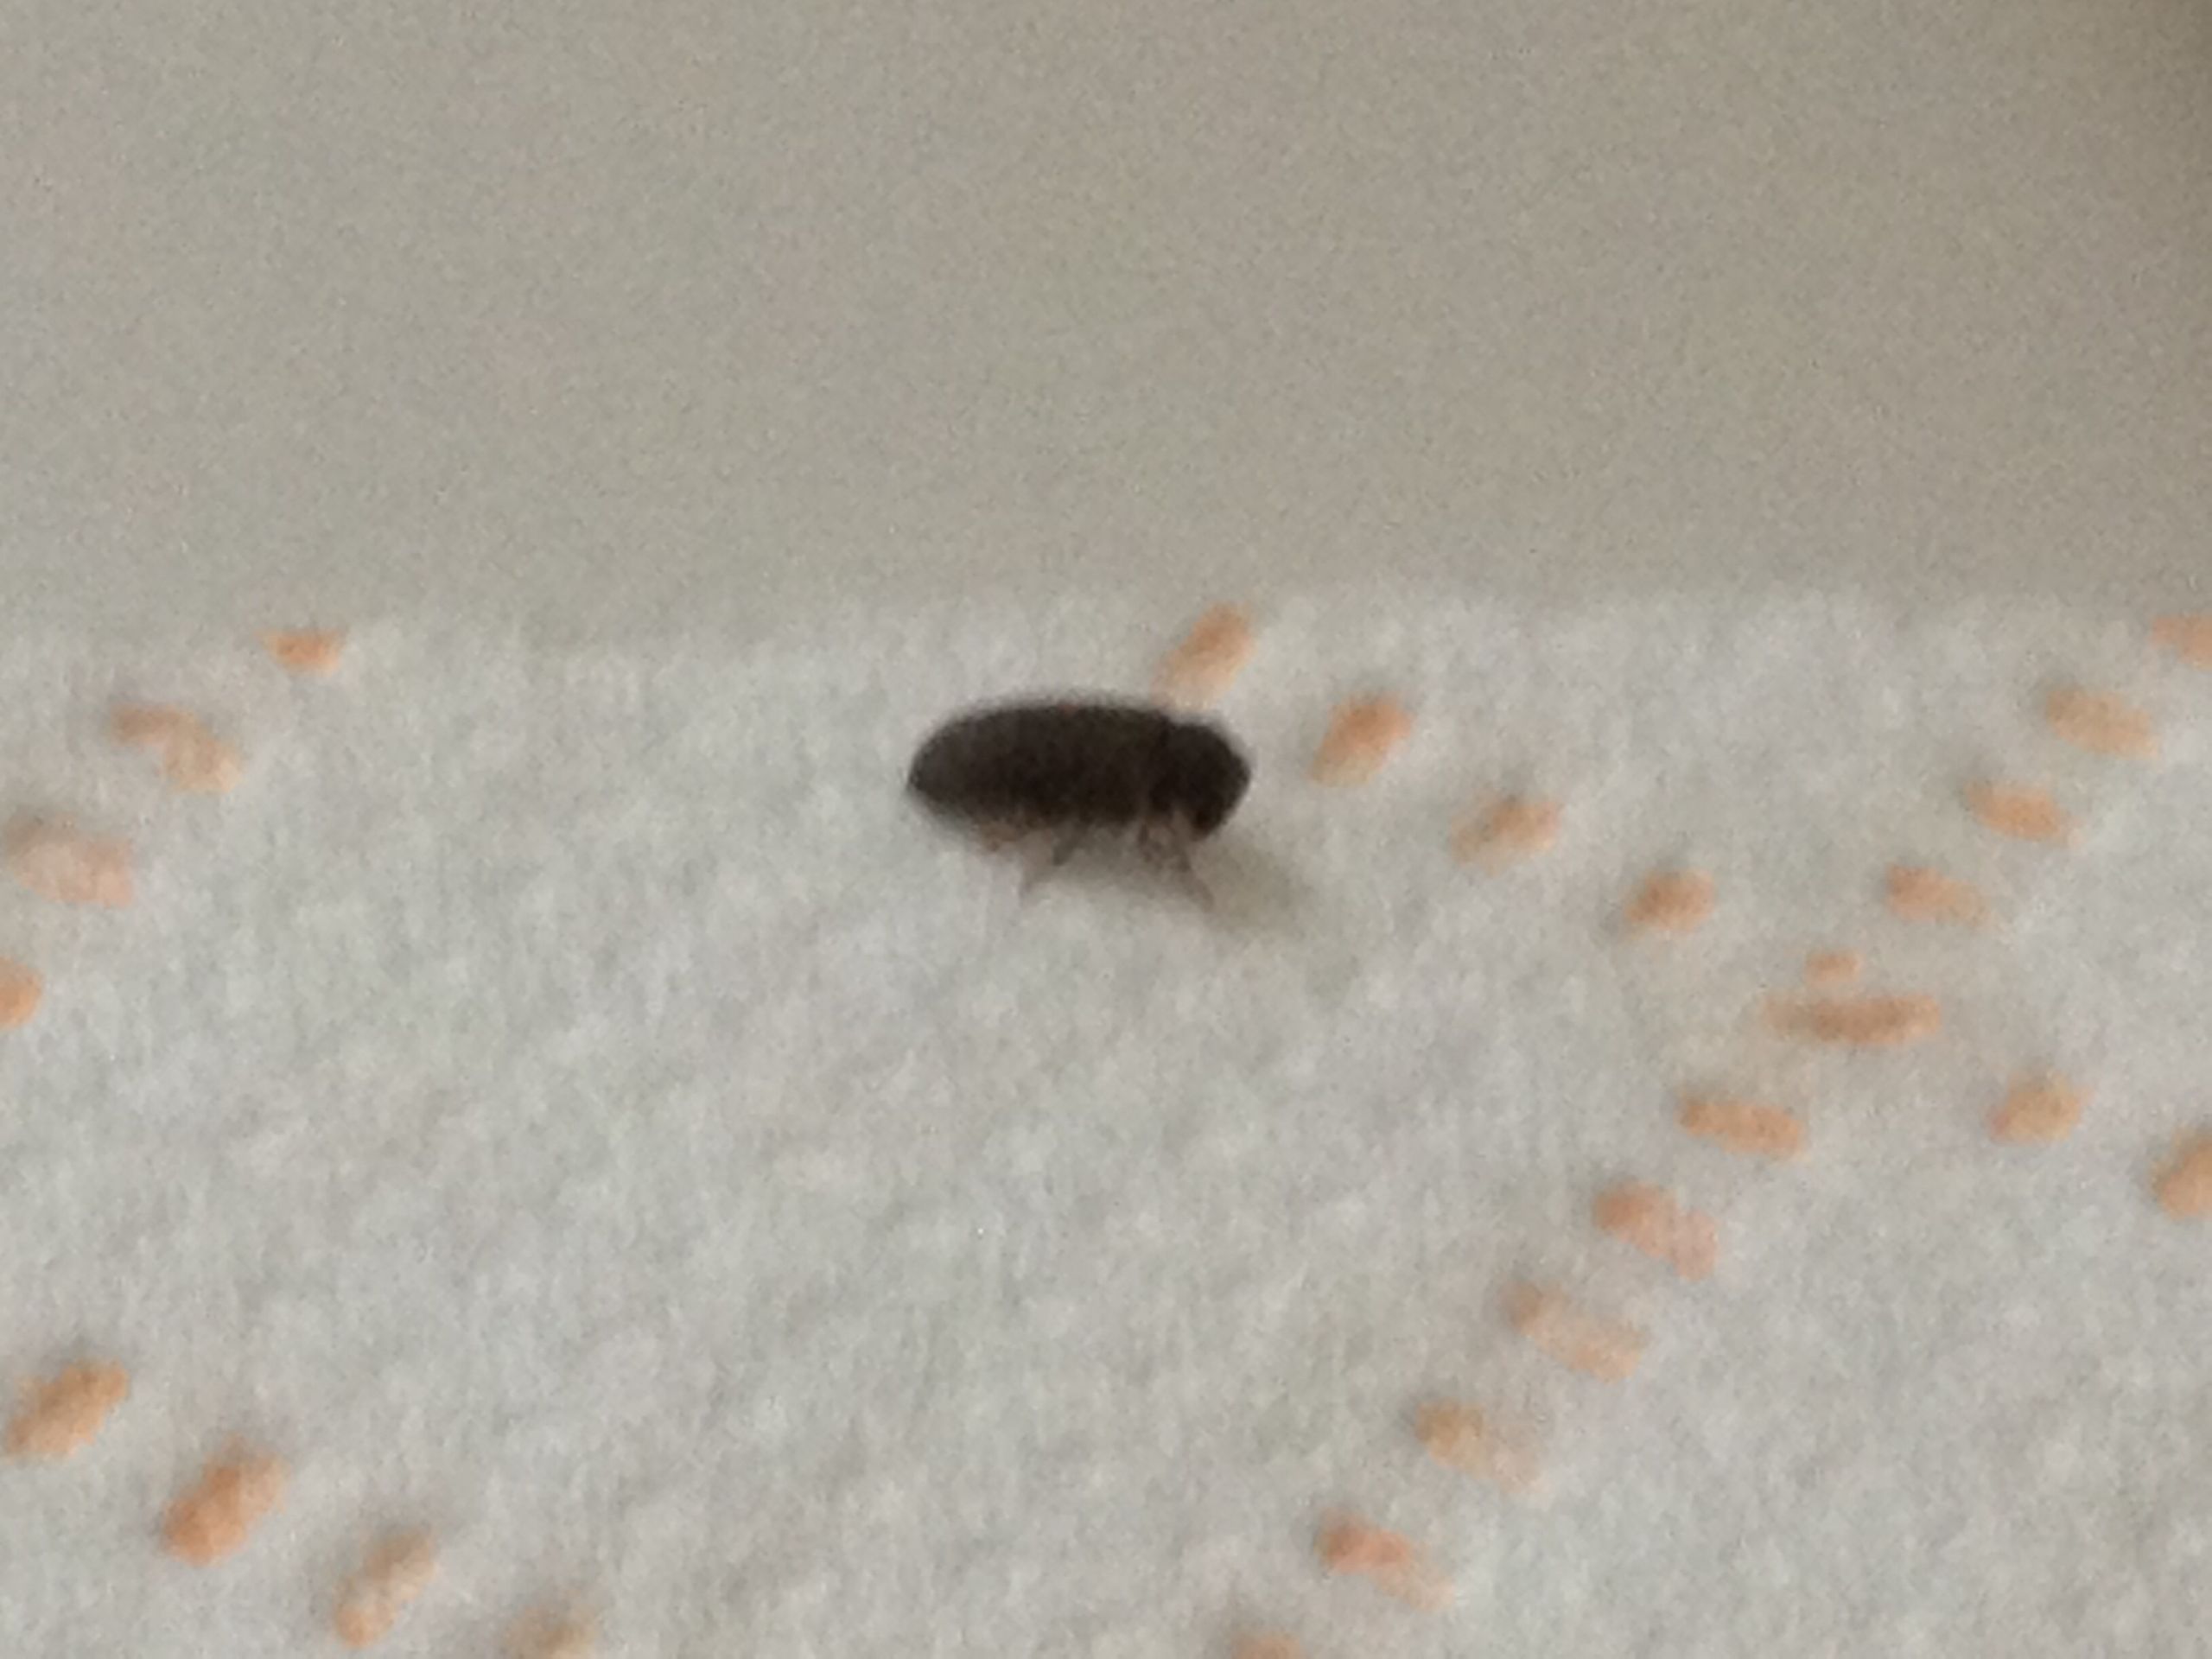 Small Flying Bugs In Bathroom
 NaturePlus Please help me identify tiny black bugs found